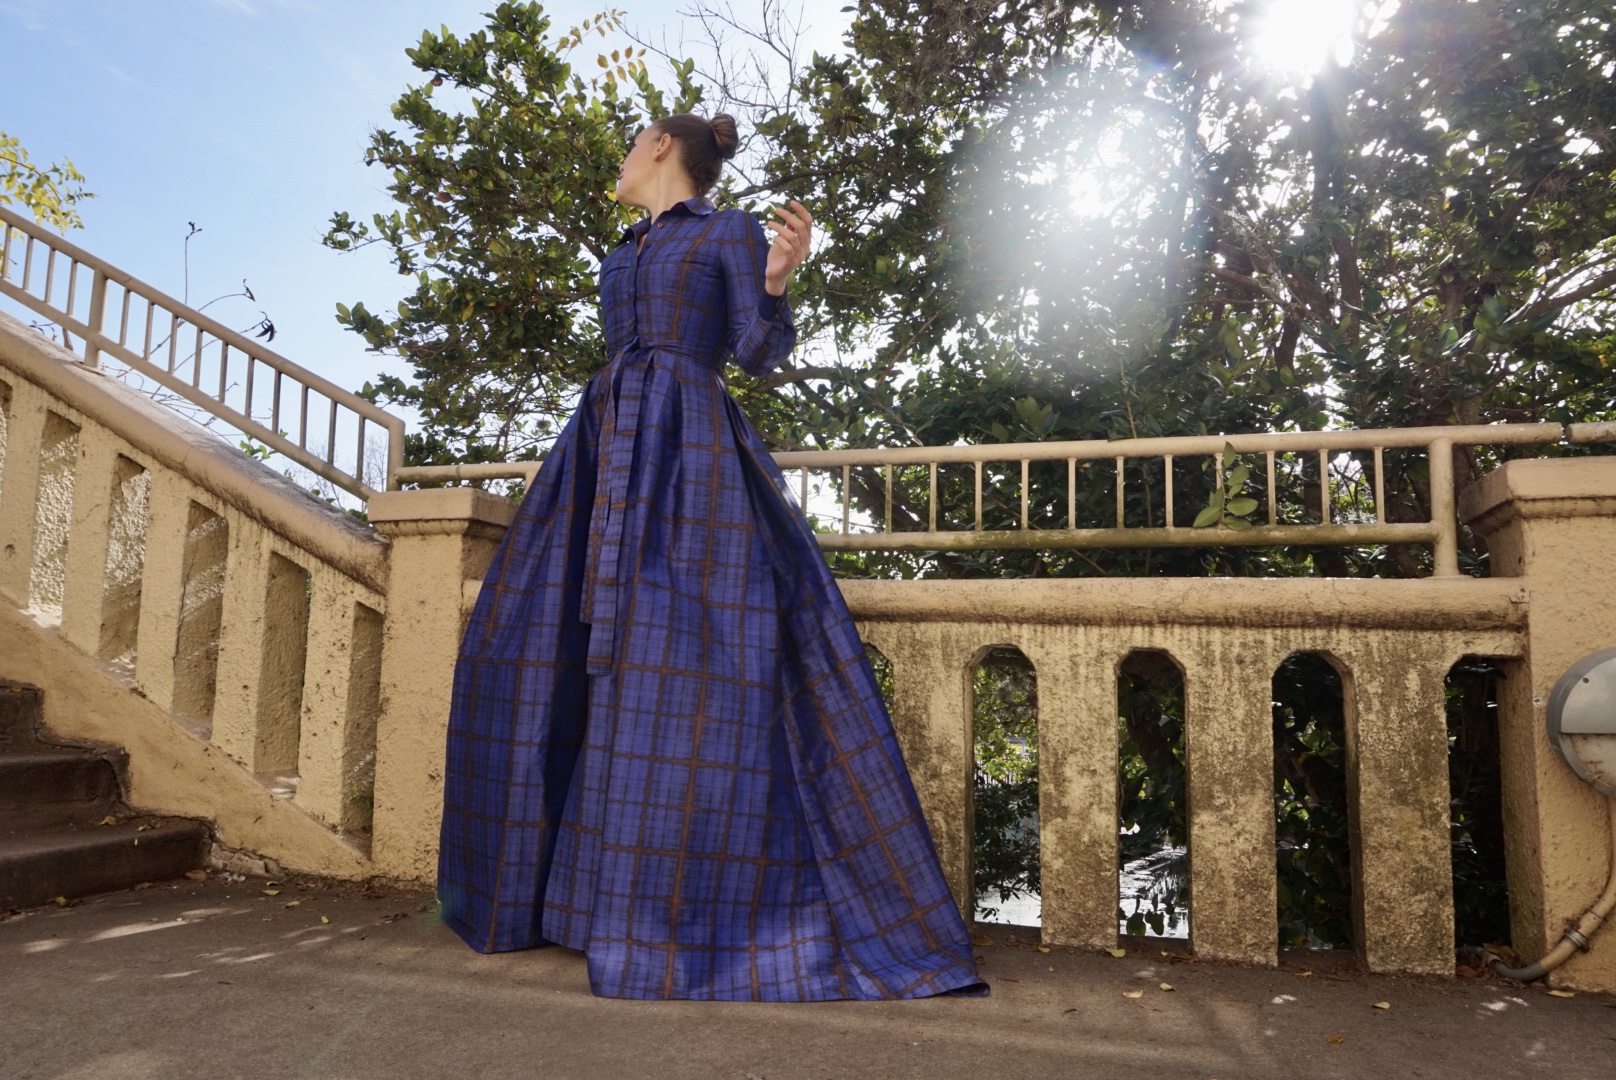 a woman in a plaid purple gown and shoes in front of stone wall and trees